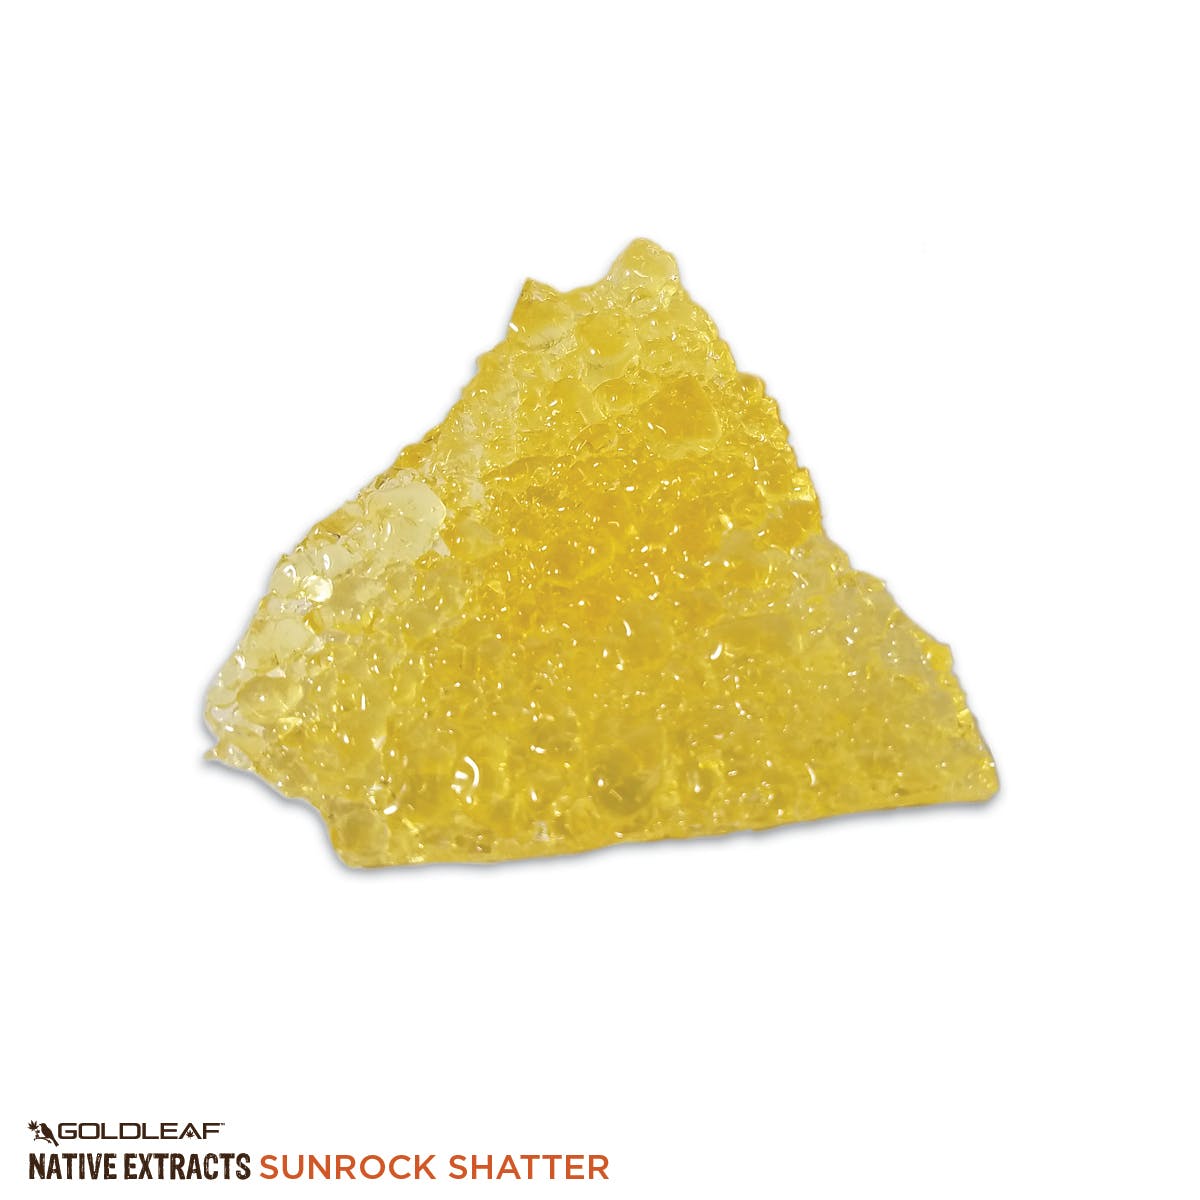 concentrate-1000mg-1g-sunrock-shatter-mag-landrace